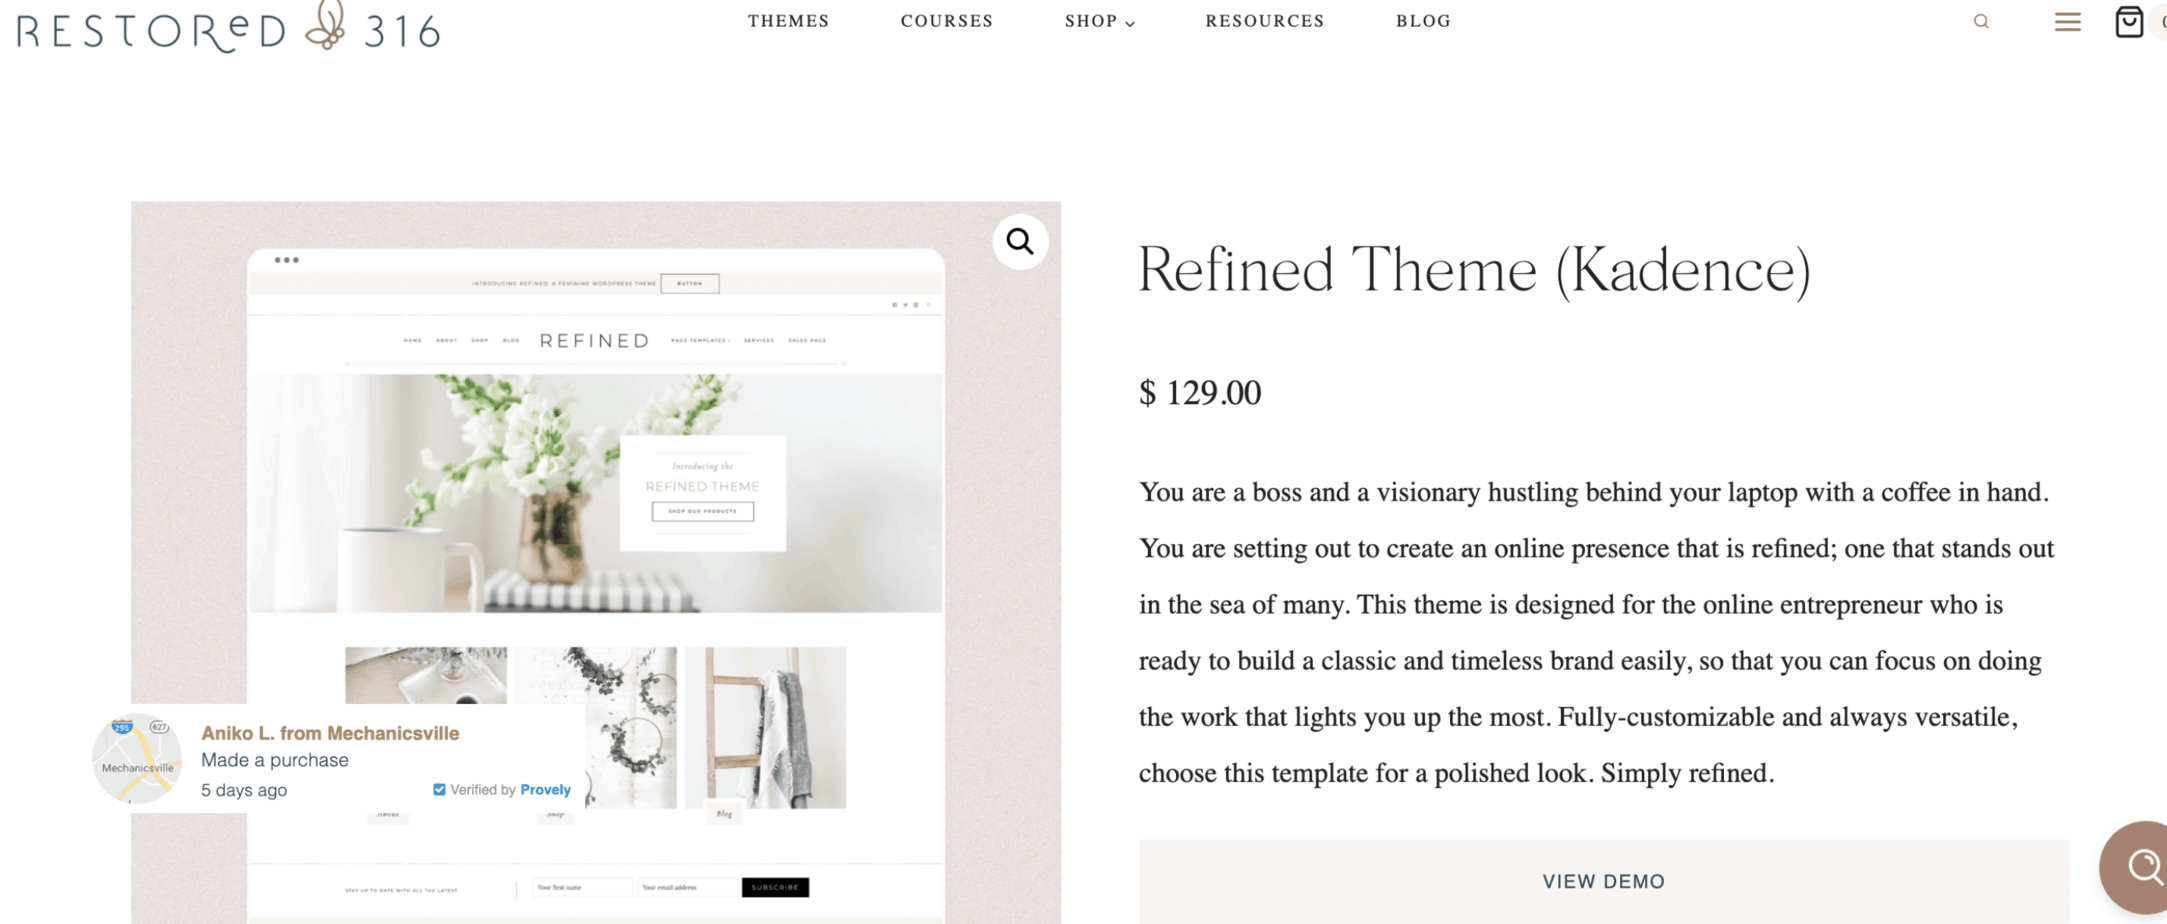 Restored 316 WordPress themes for the online entrepreneur or blogger with a professional and stunning look. refined Theme, Genesis and Kadence for all Female Bosses.